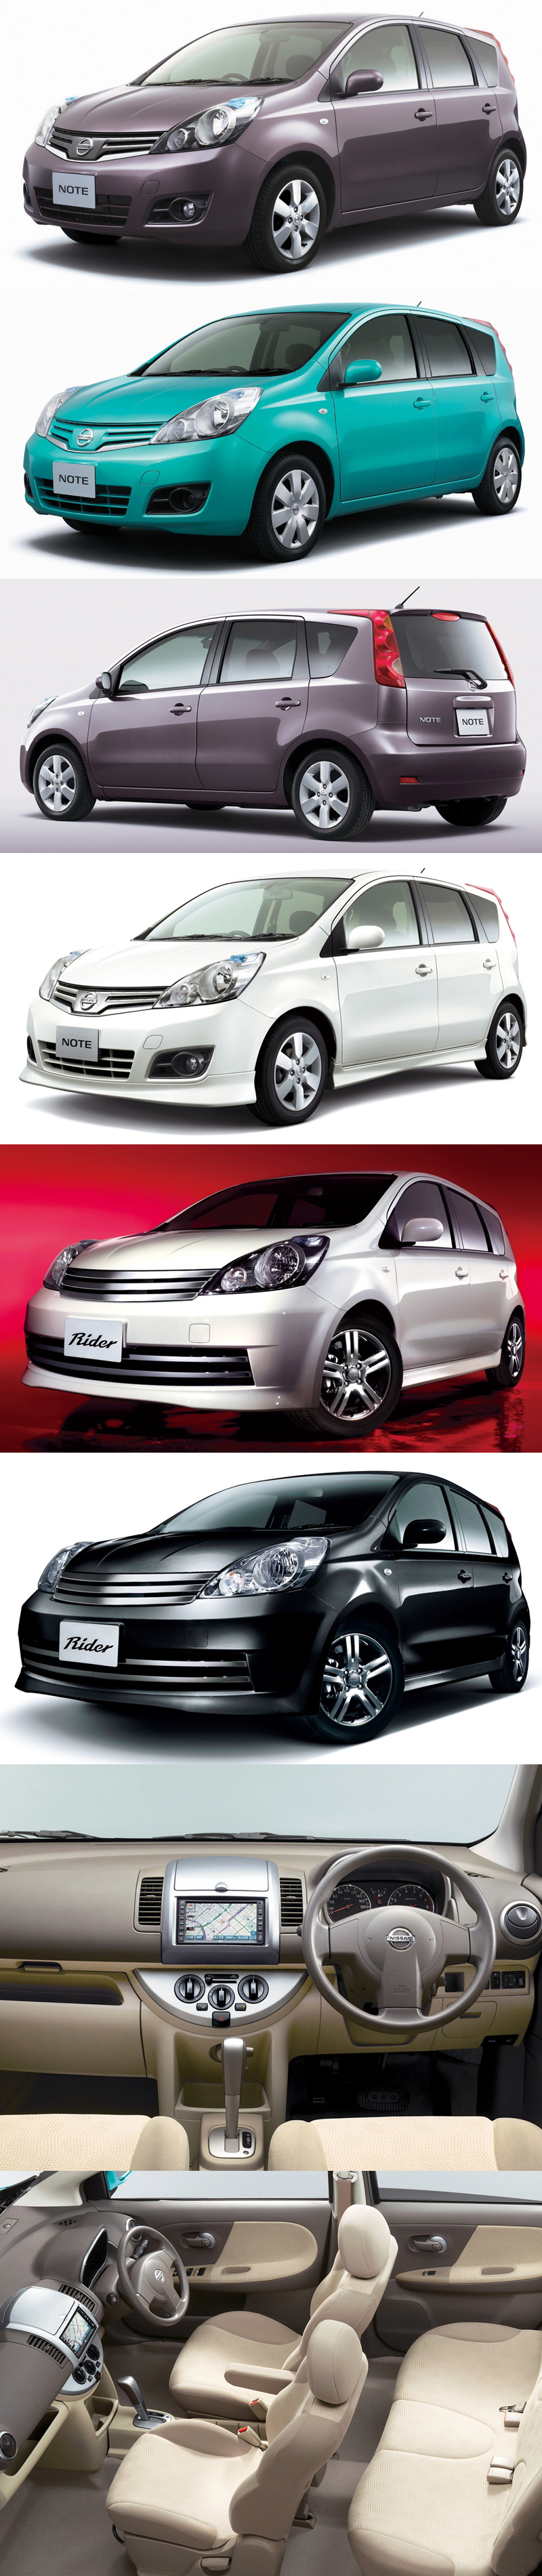 2010_Nissan_Note_Lineup